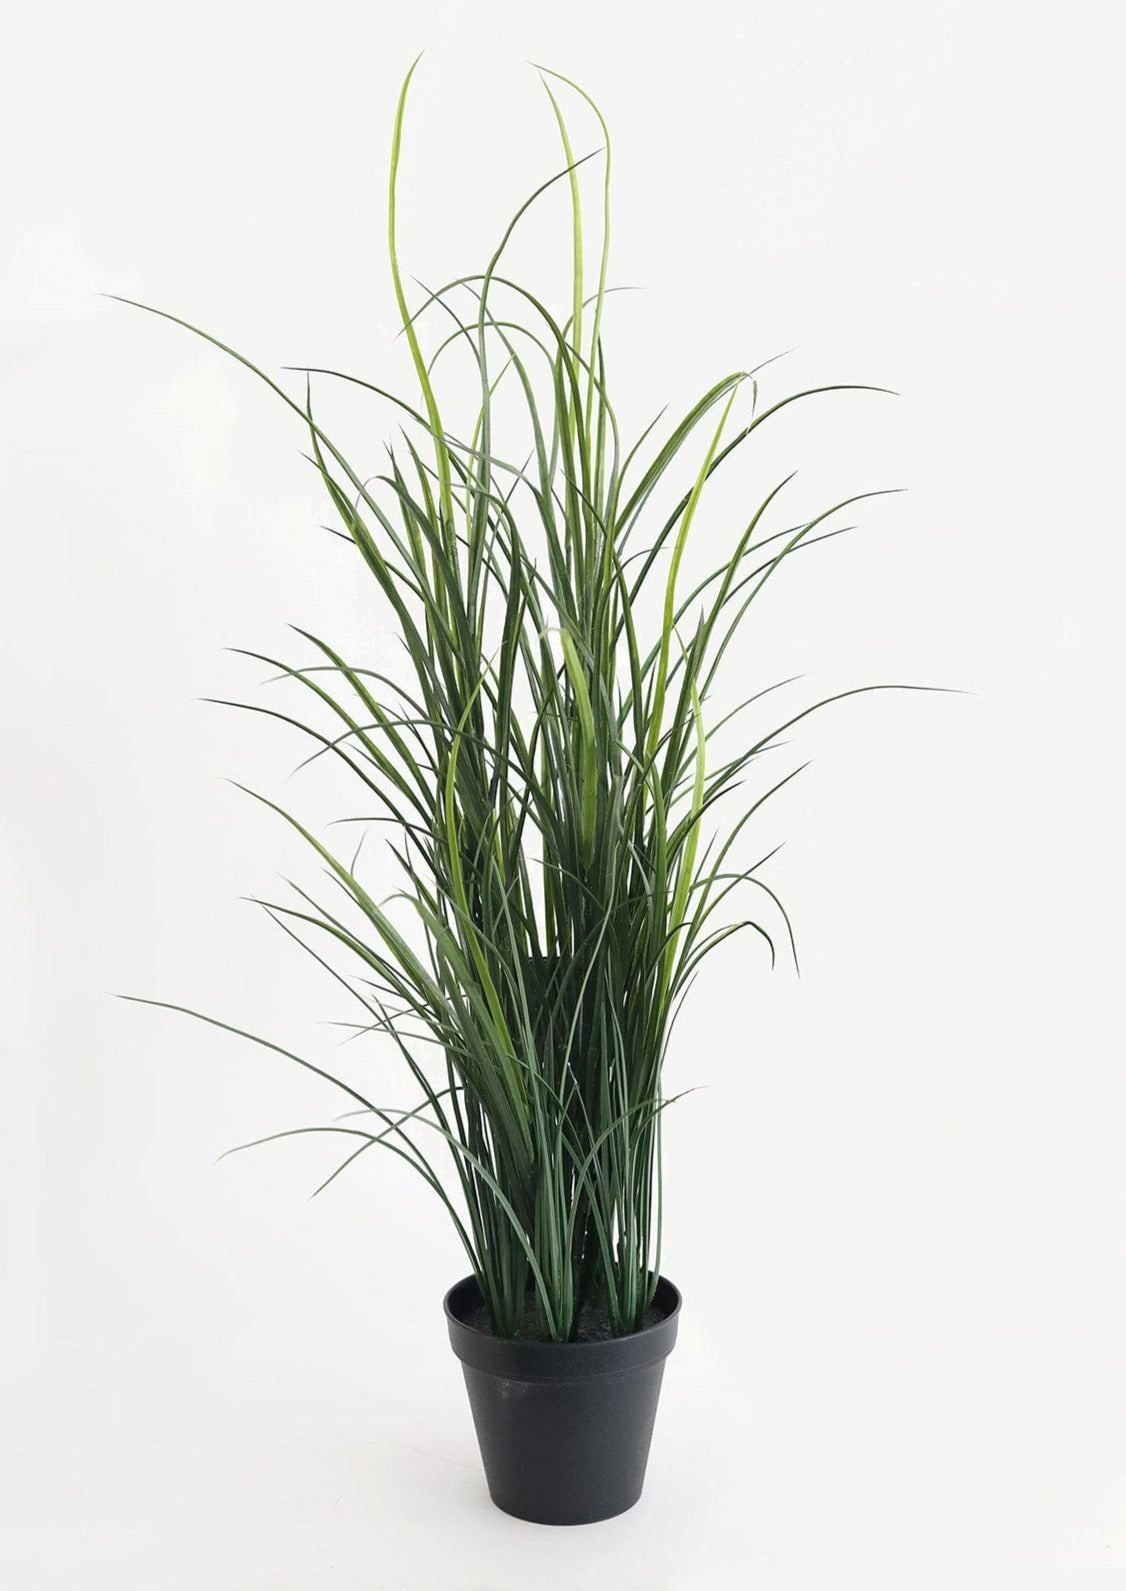 UV Treated Outdoor Fake Plants Tall Grass in Pot